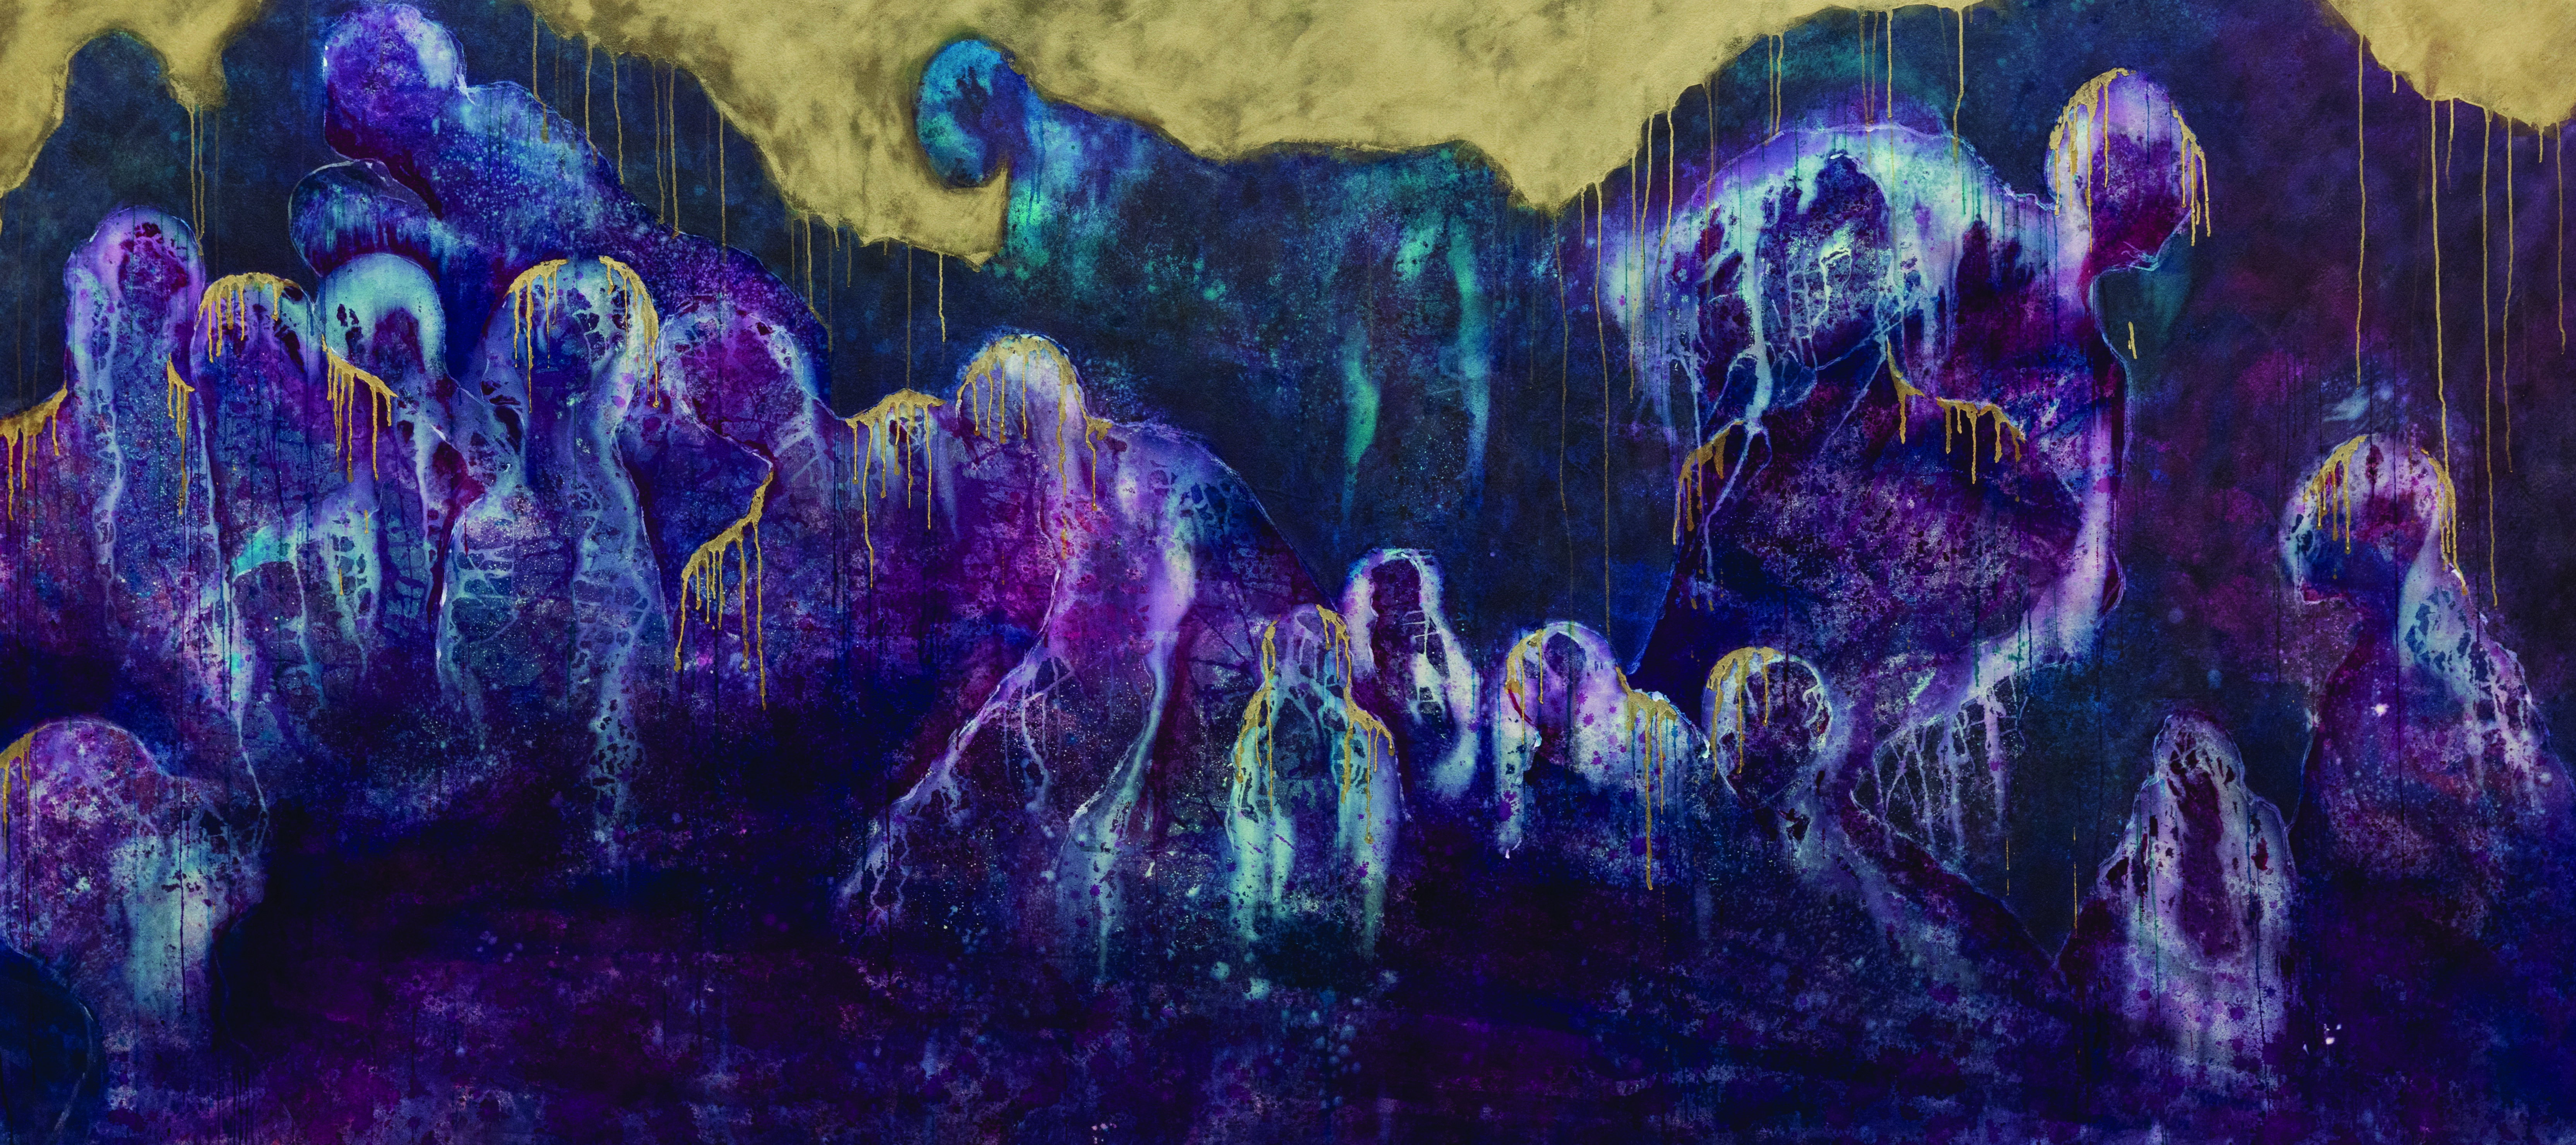 A wide abstract painting with undulating masses of purple, teal, dark navy, and black with gold drips.